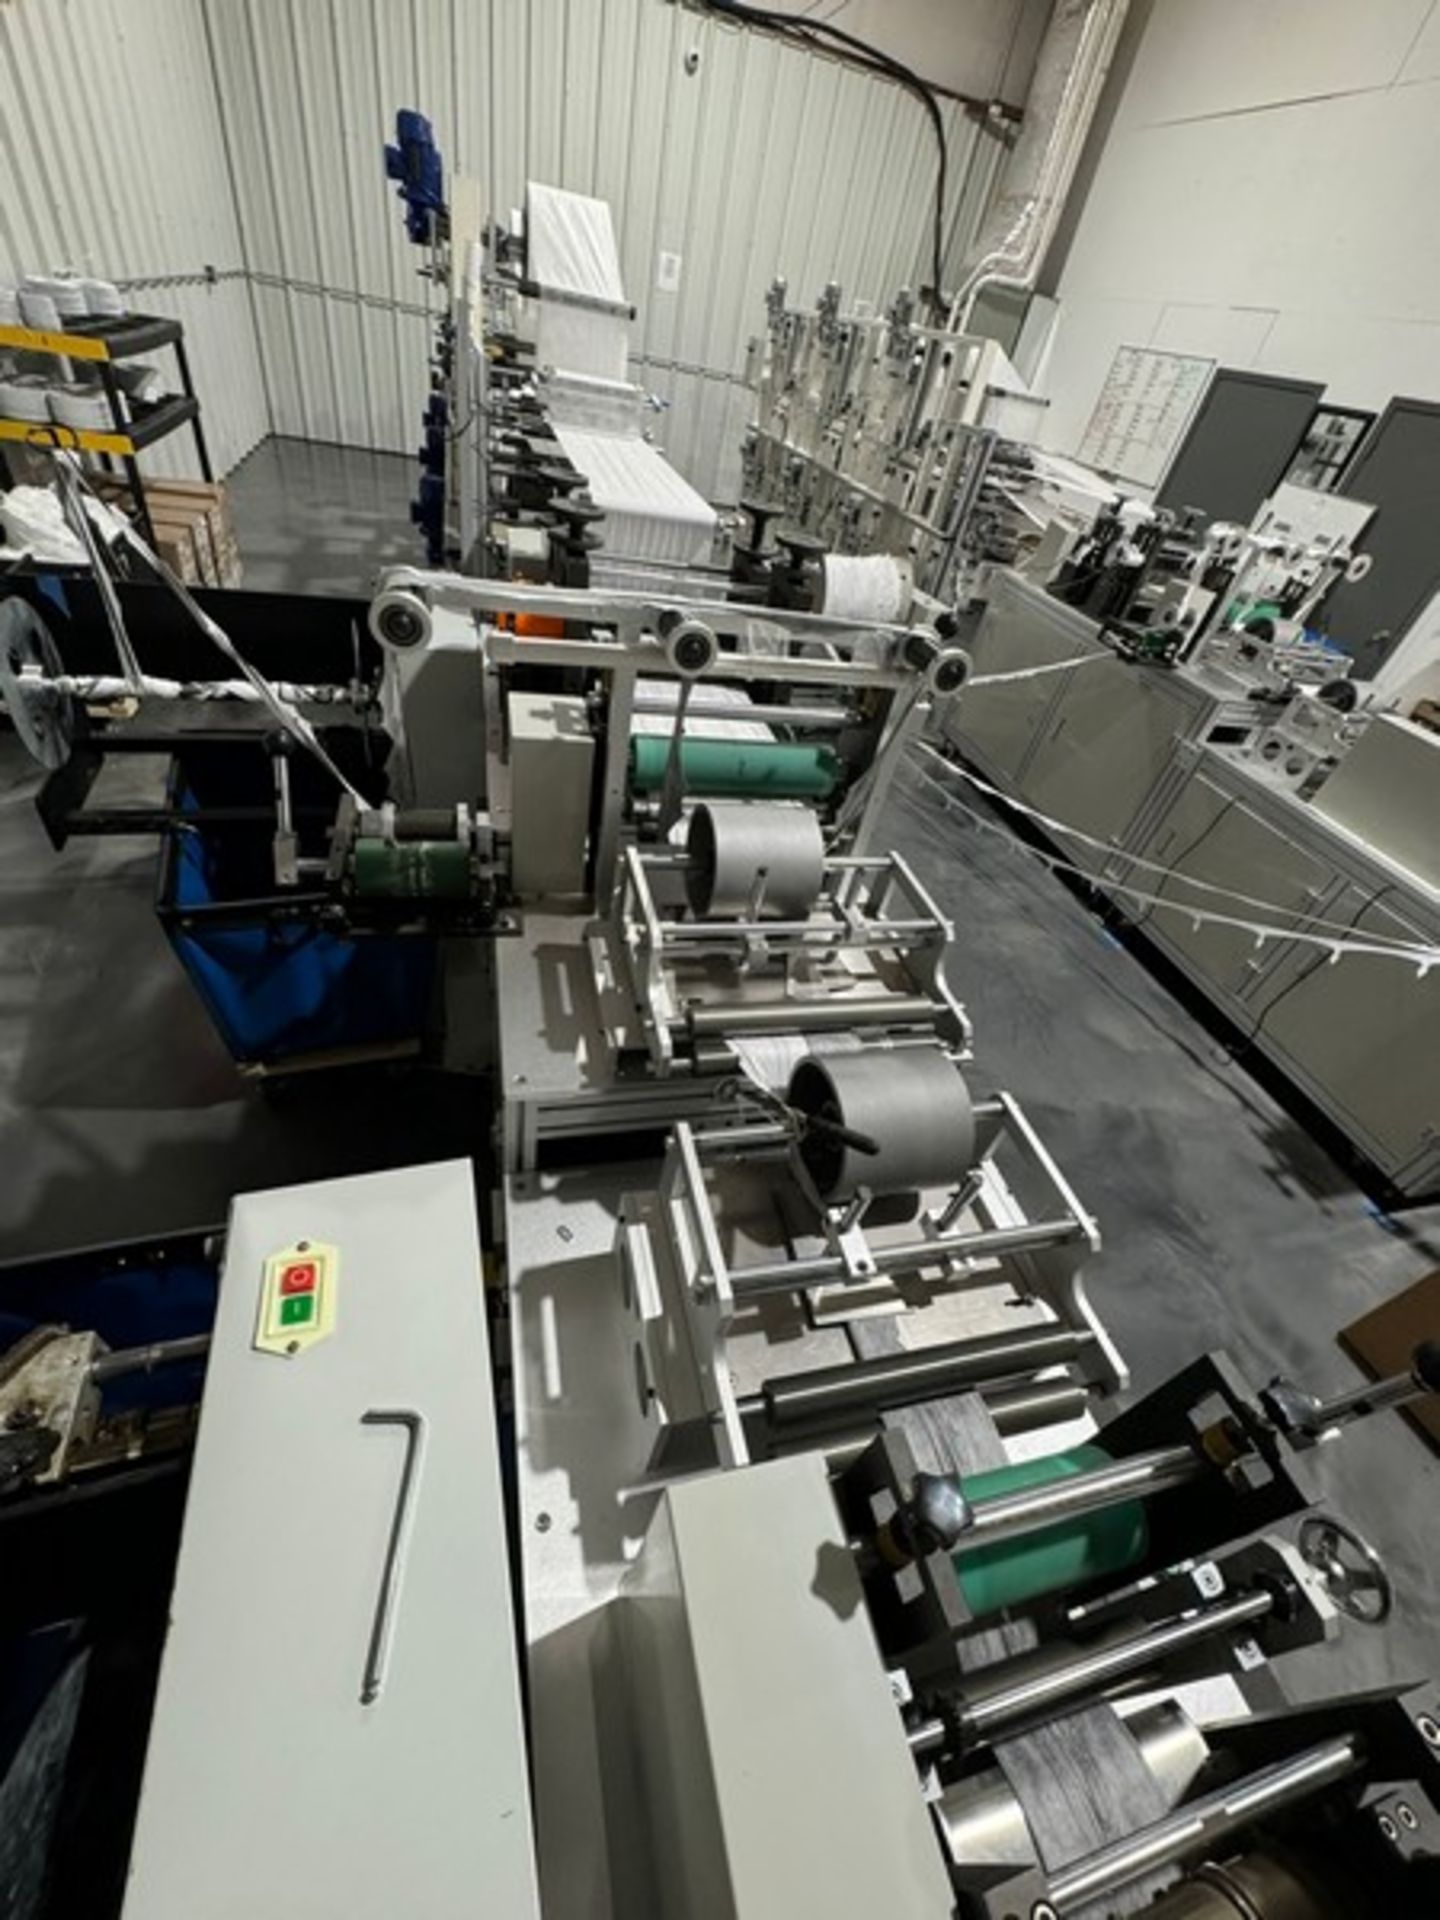 2022 KYD Automatic 4,000 Units Per Hour Mask Manufacturing Line, Includes Unwinding Station, Rolling - Bild 12 aus 14